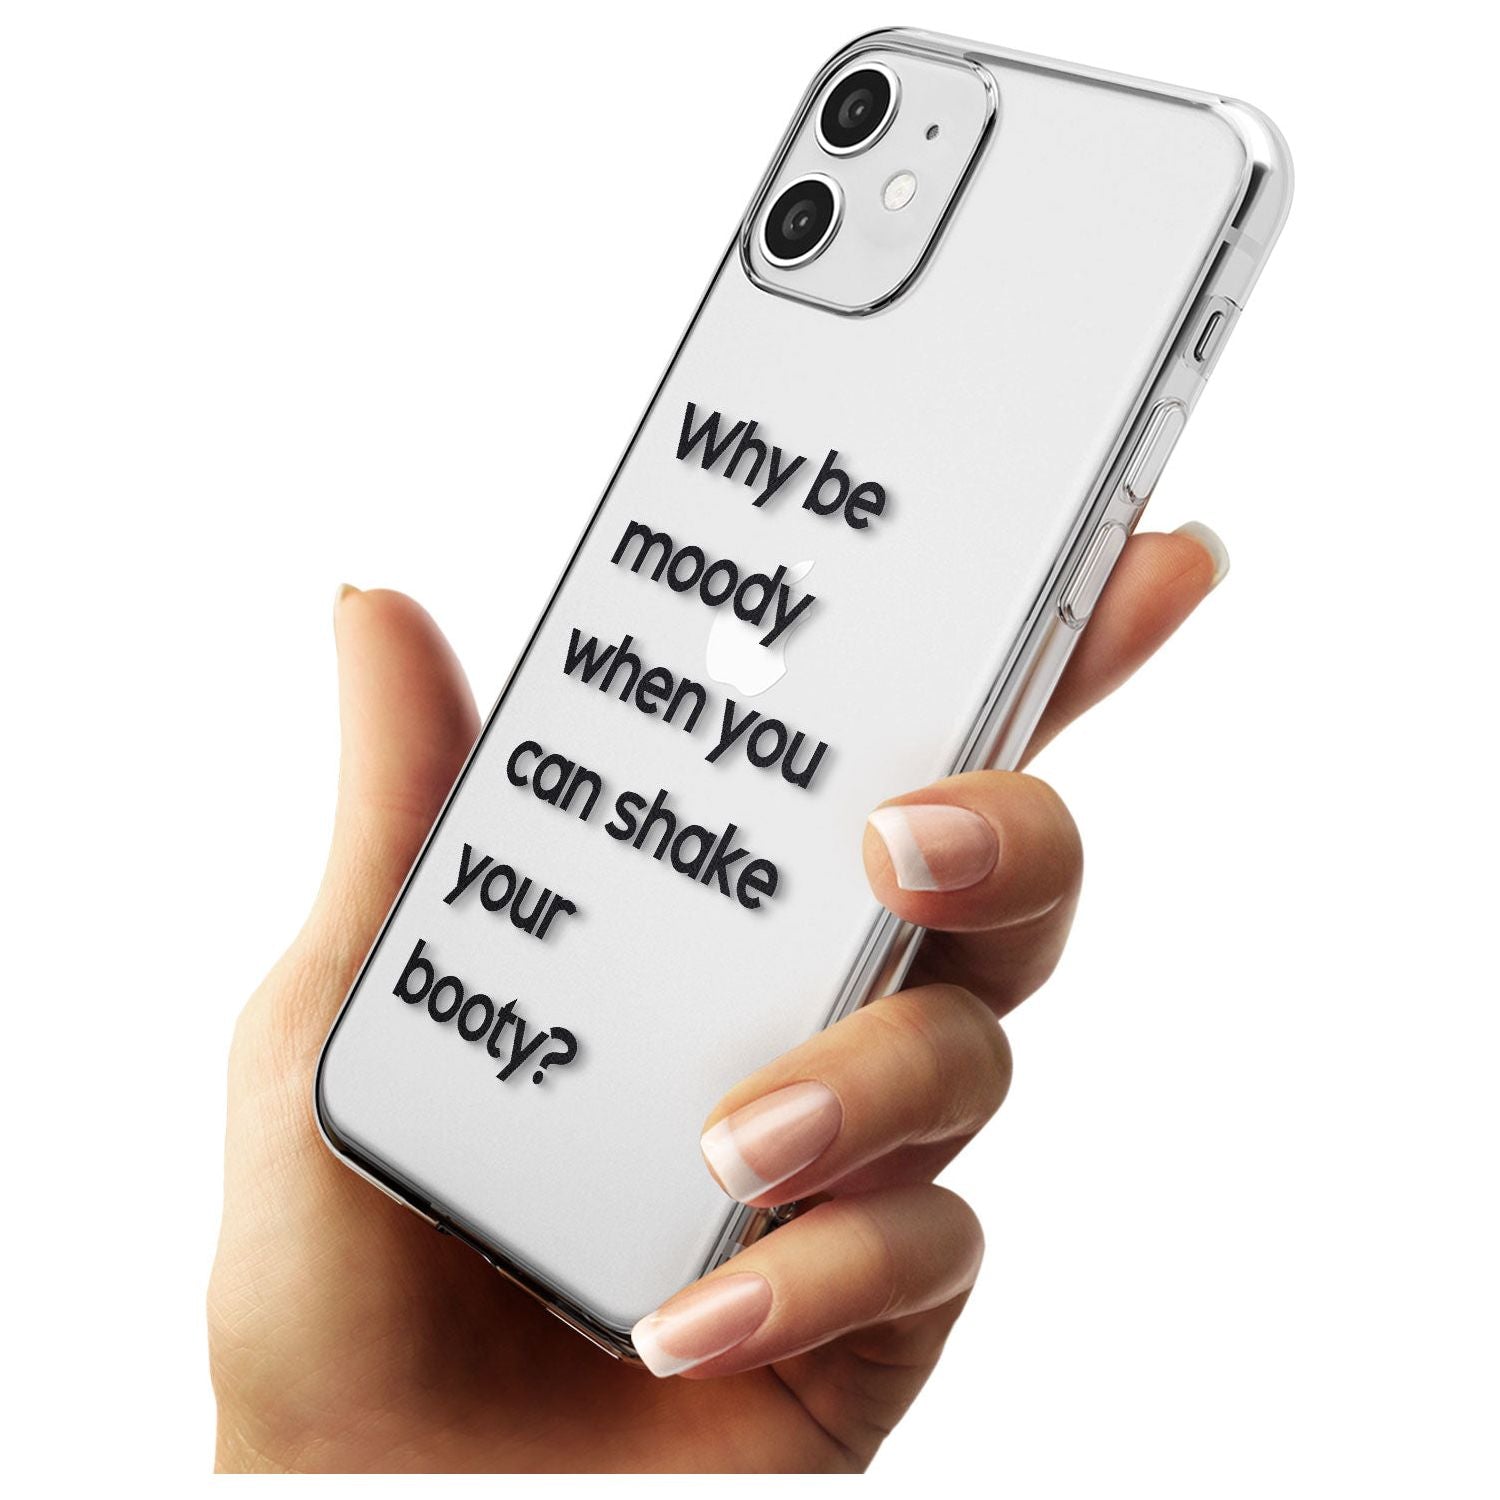 Why be moody? Black Impact Phone Case for iPhone 11